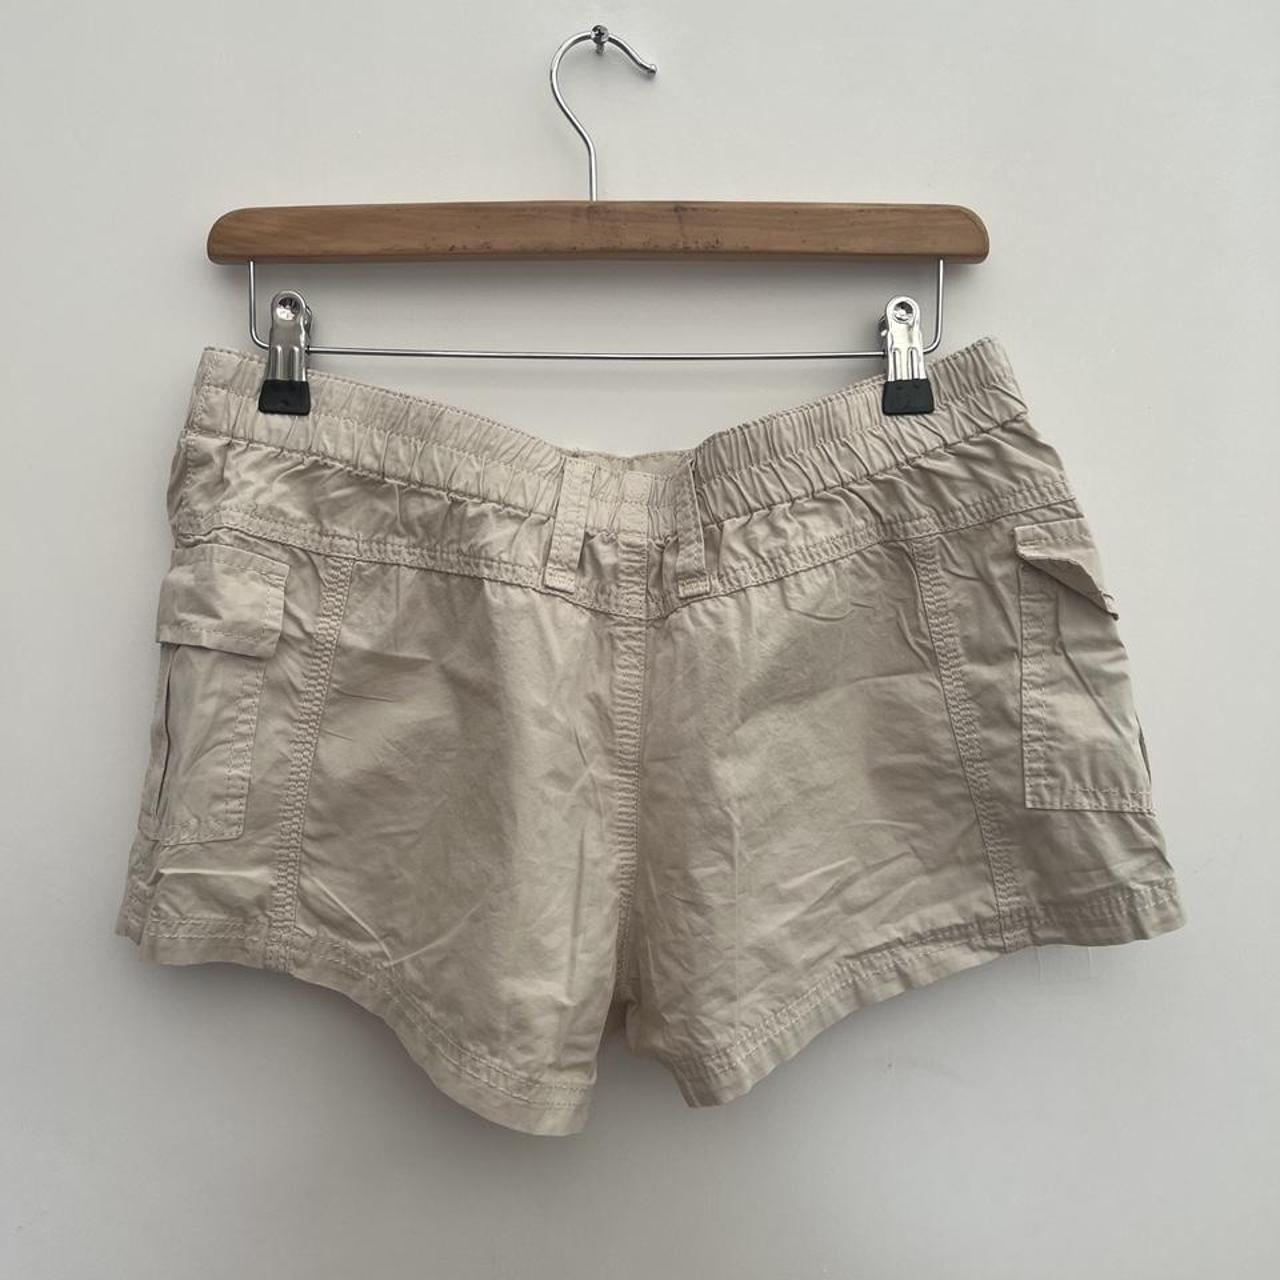 Urban outfitters BDG y2k cargo shorts in... - Depop